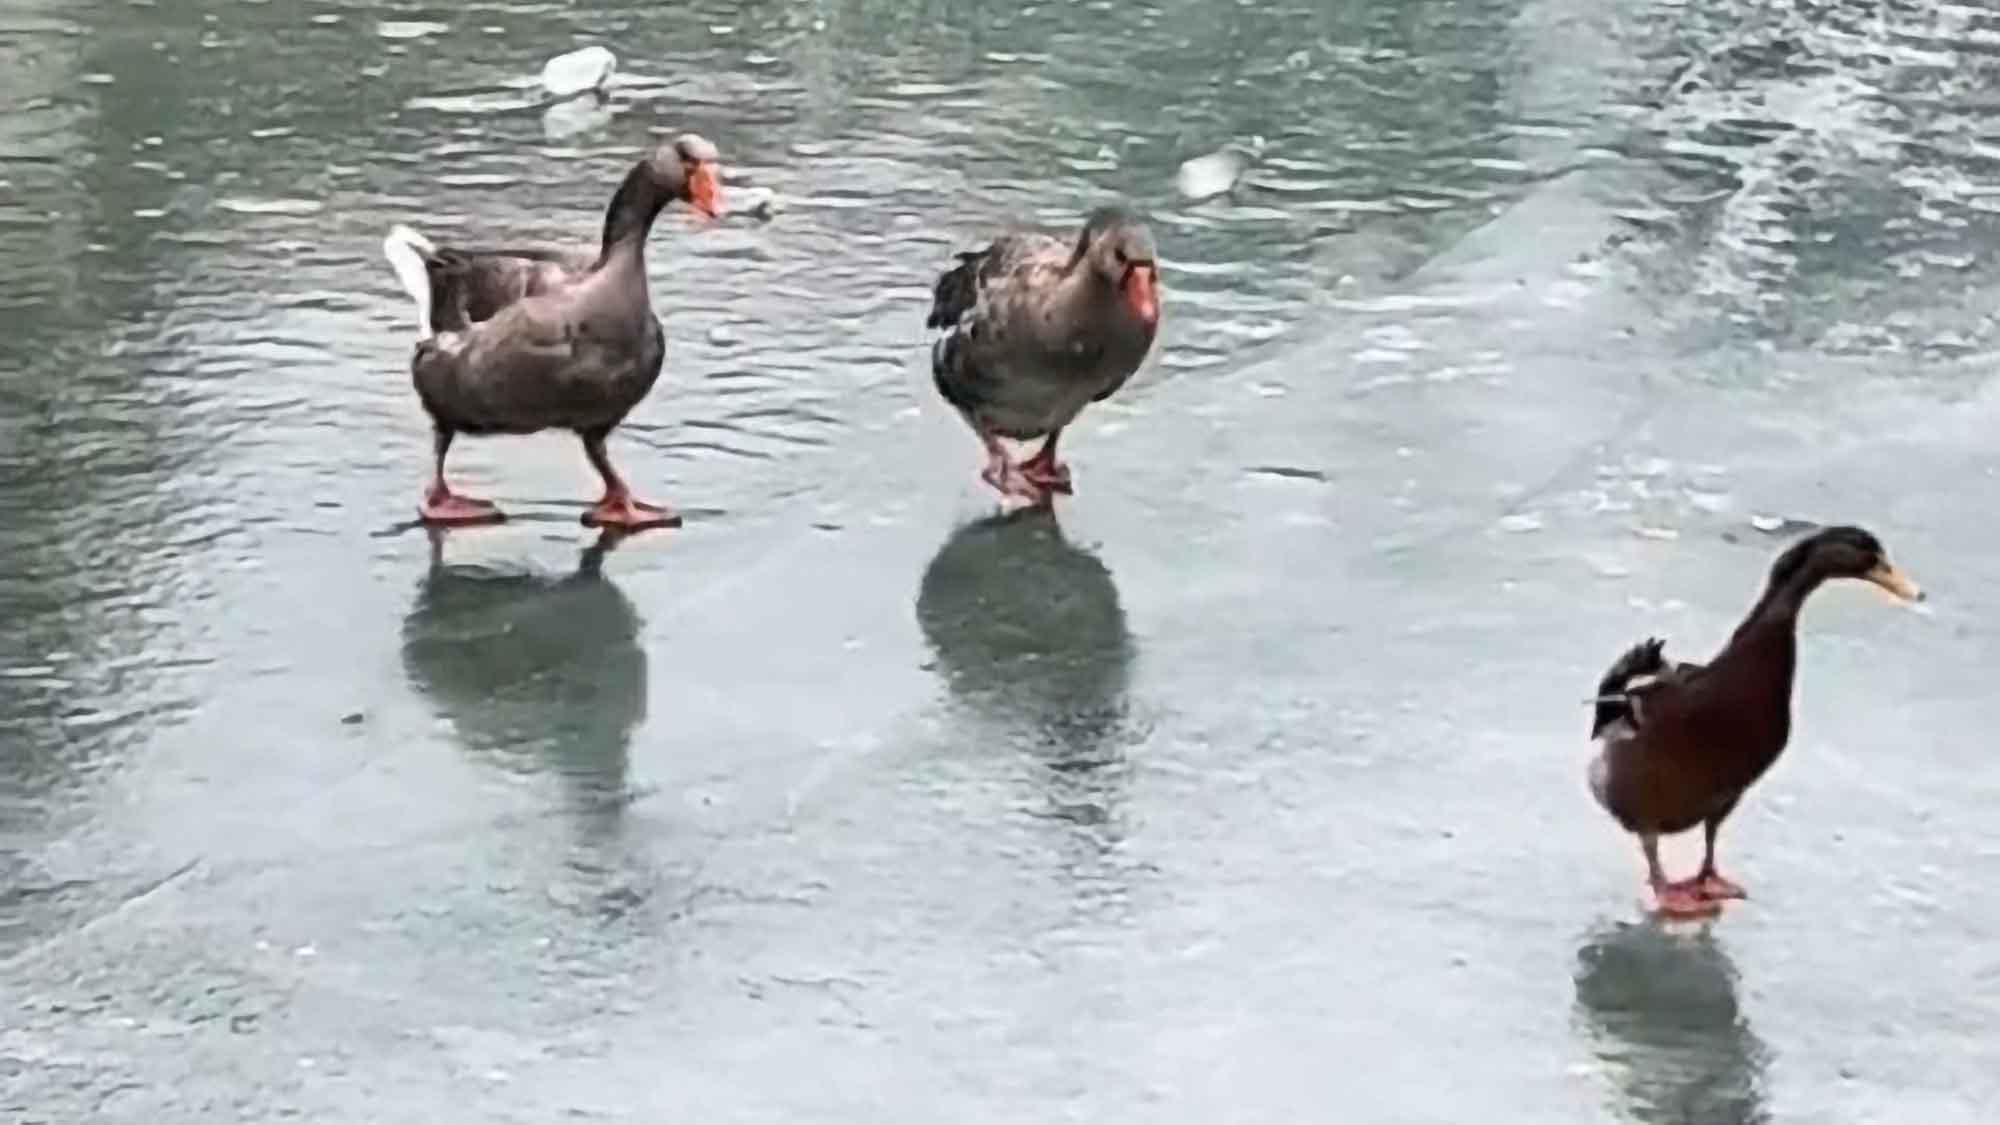 Hilarious Moment Steadfast Duck Waddles On Frozen Pond With Its Webbed Feet Slipping And Sliding On Icy Surface